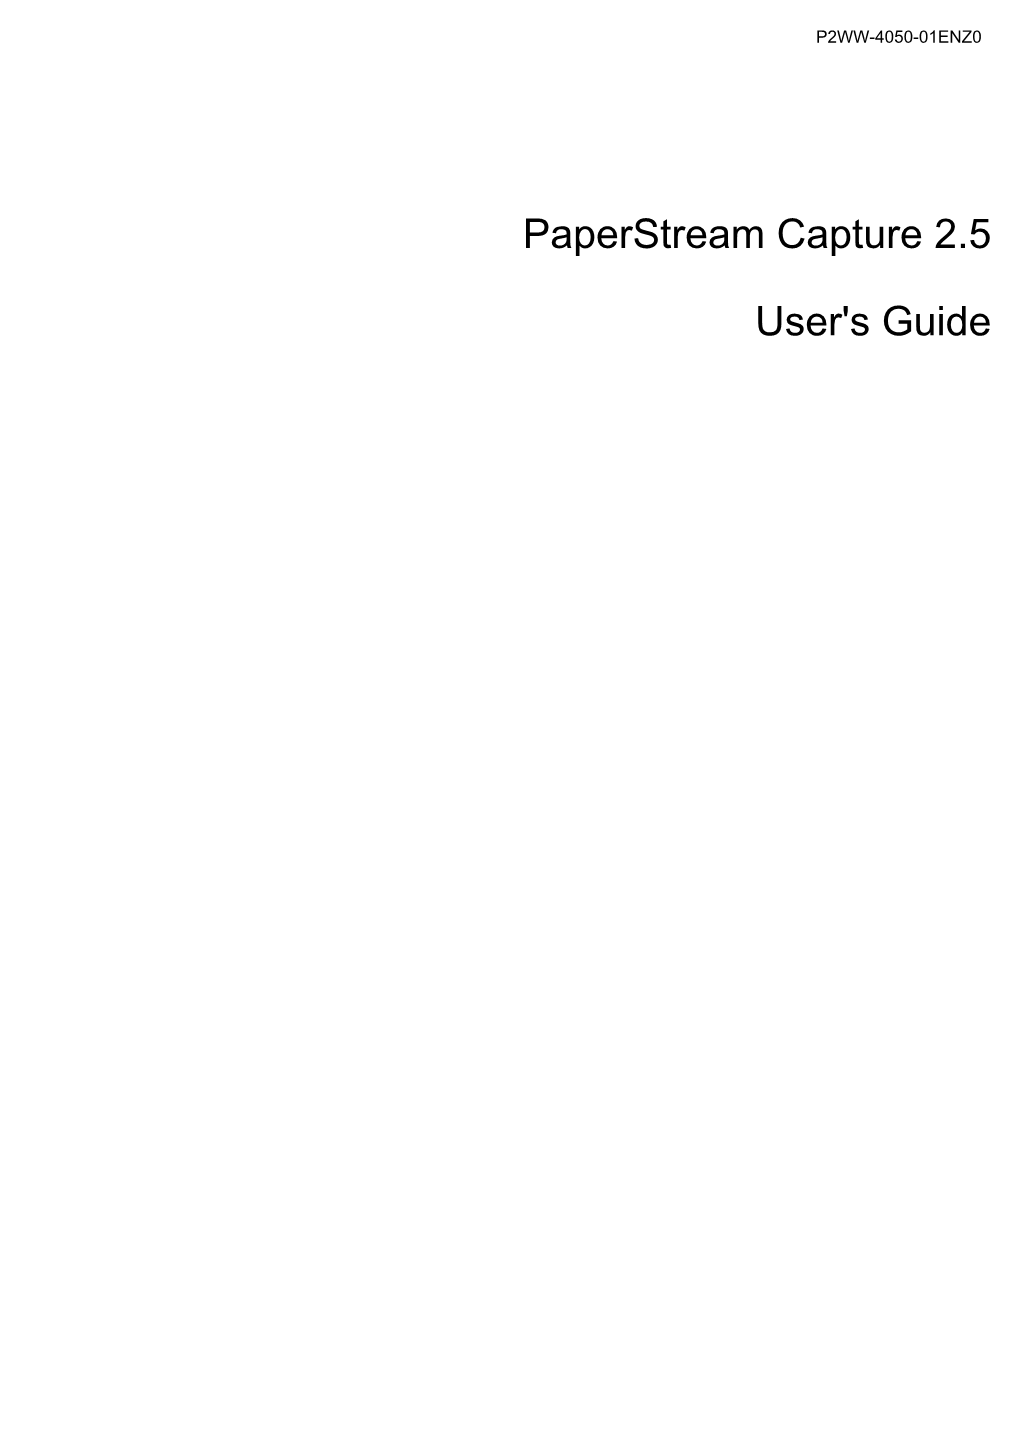 Paperstream Capture 2.5 User's Guide P2WW-4050-01ENZ0 Issue Date: March 2018 Issued By: PFU Limited ● the Contents of This Manual Are Subject to Change Without Notice